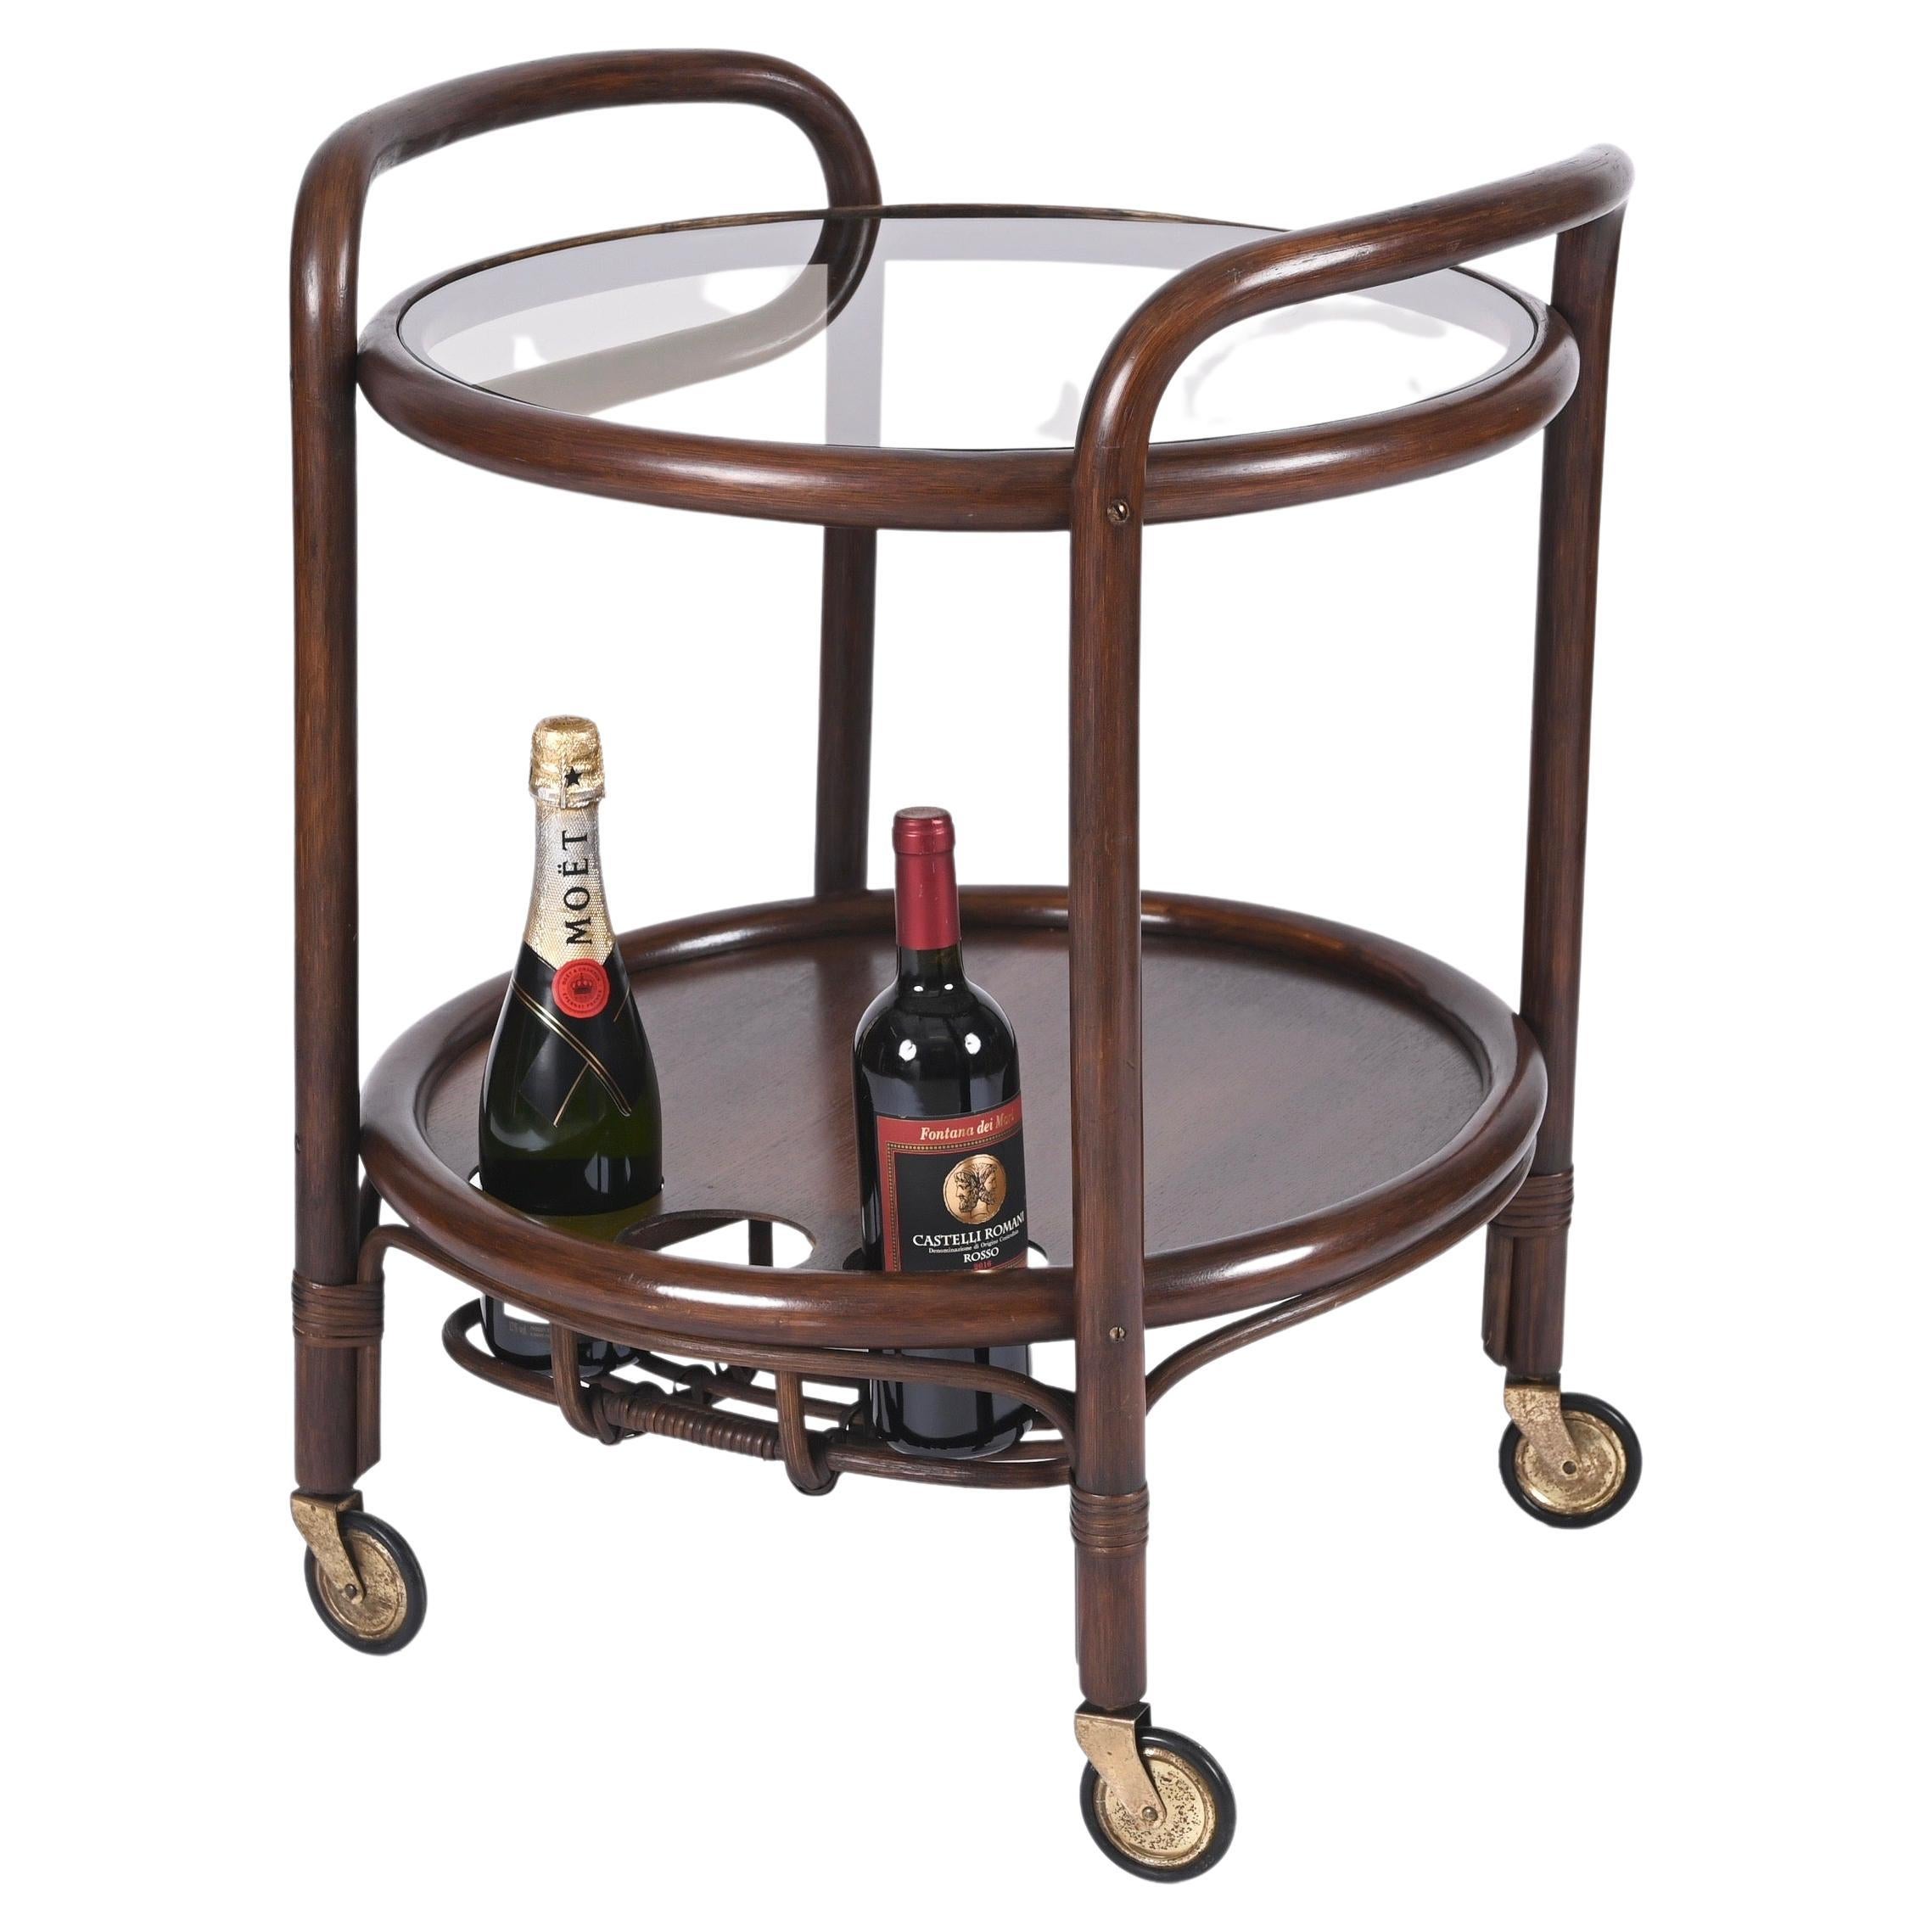 Midcentury Bar Serving Cart in Bamboo, Rattan and Smoked Glass, Italy, 1970s